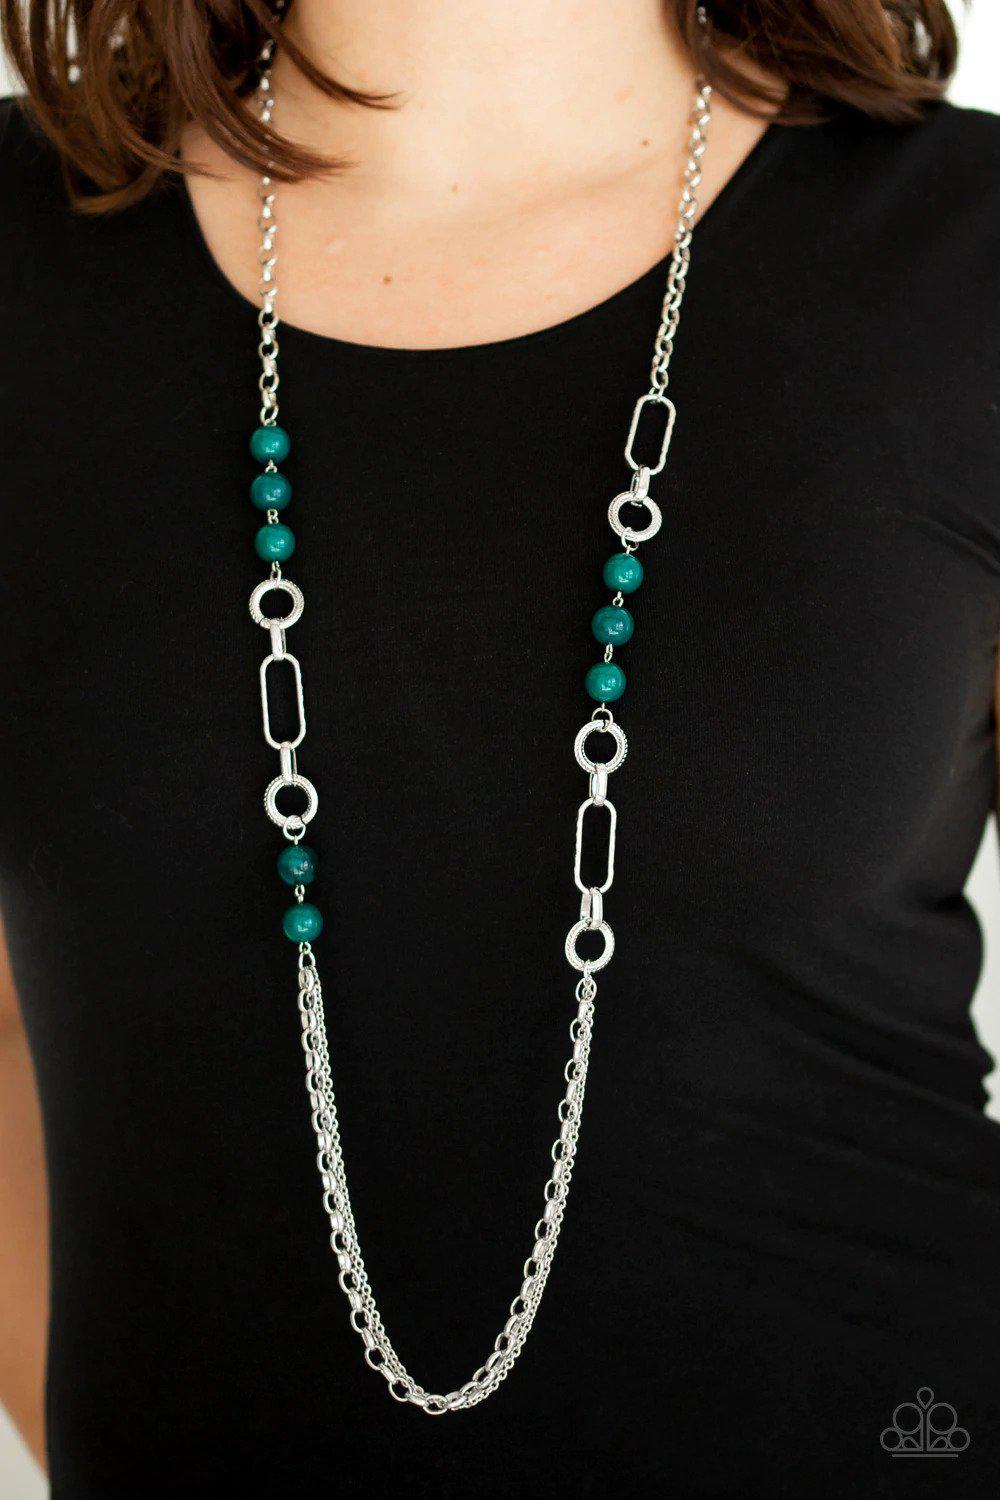 CACHE Me Out Green Necklace - Paparazzi Accessories- on model - CarasShop.com - $5 Jewelry by Cara Jewels